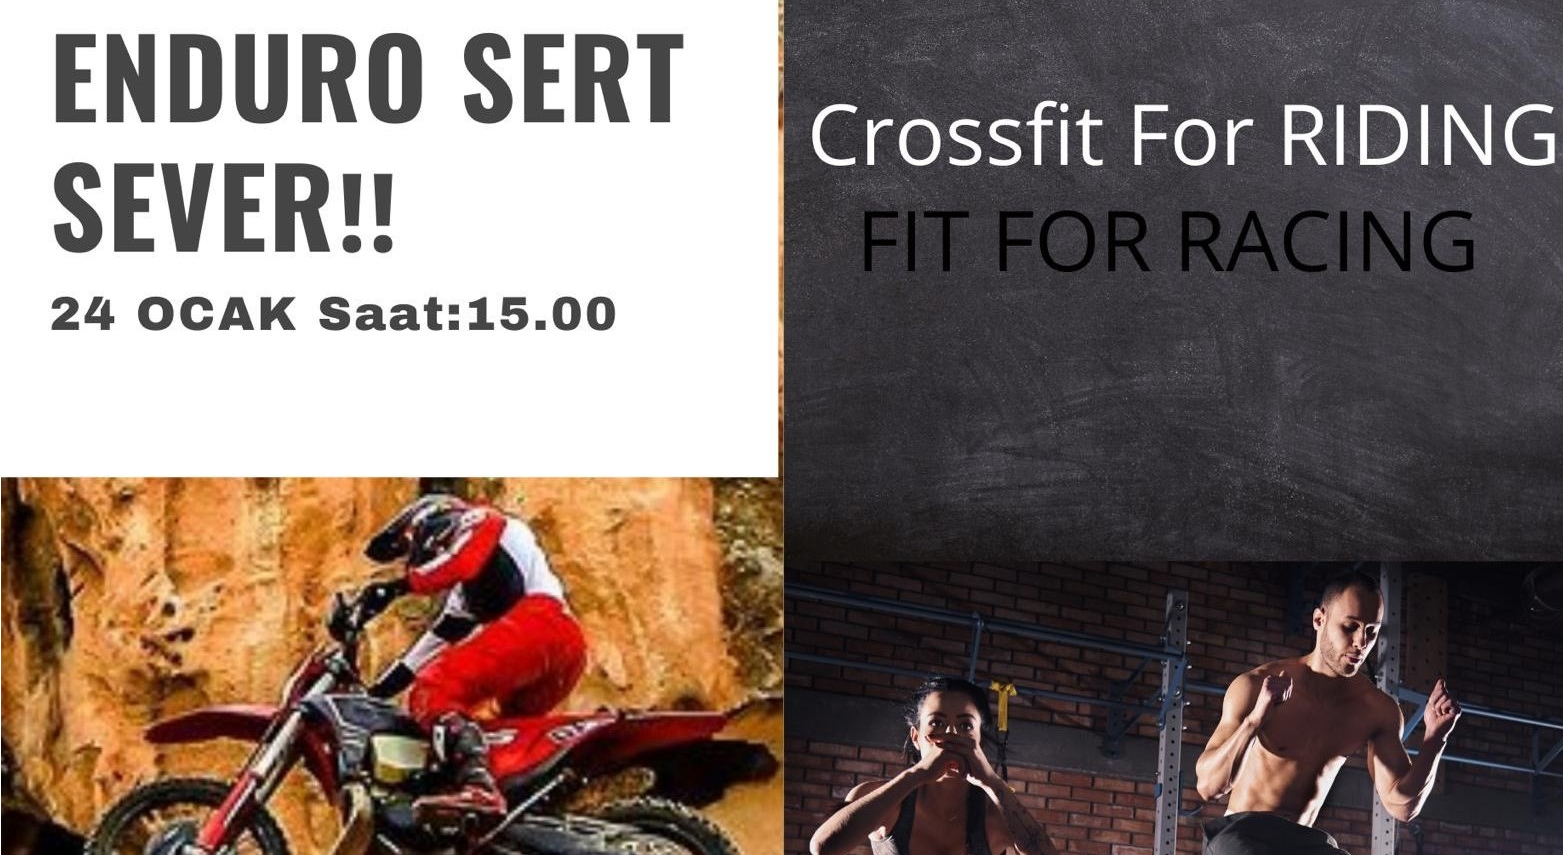 Crossfit for Riding – Fit For Racing